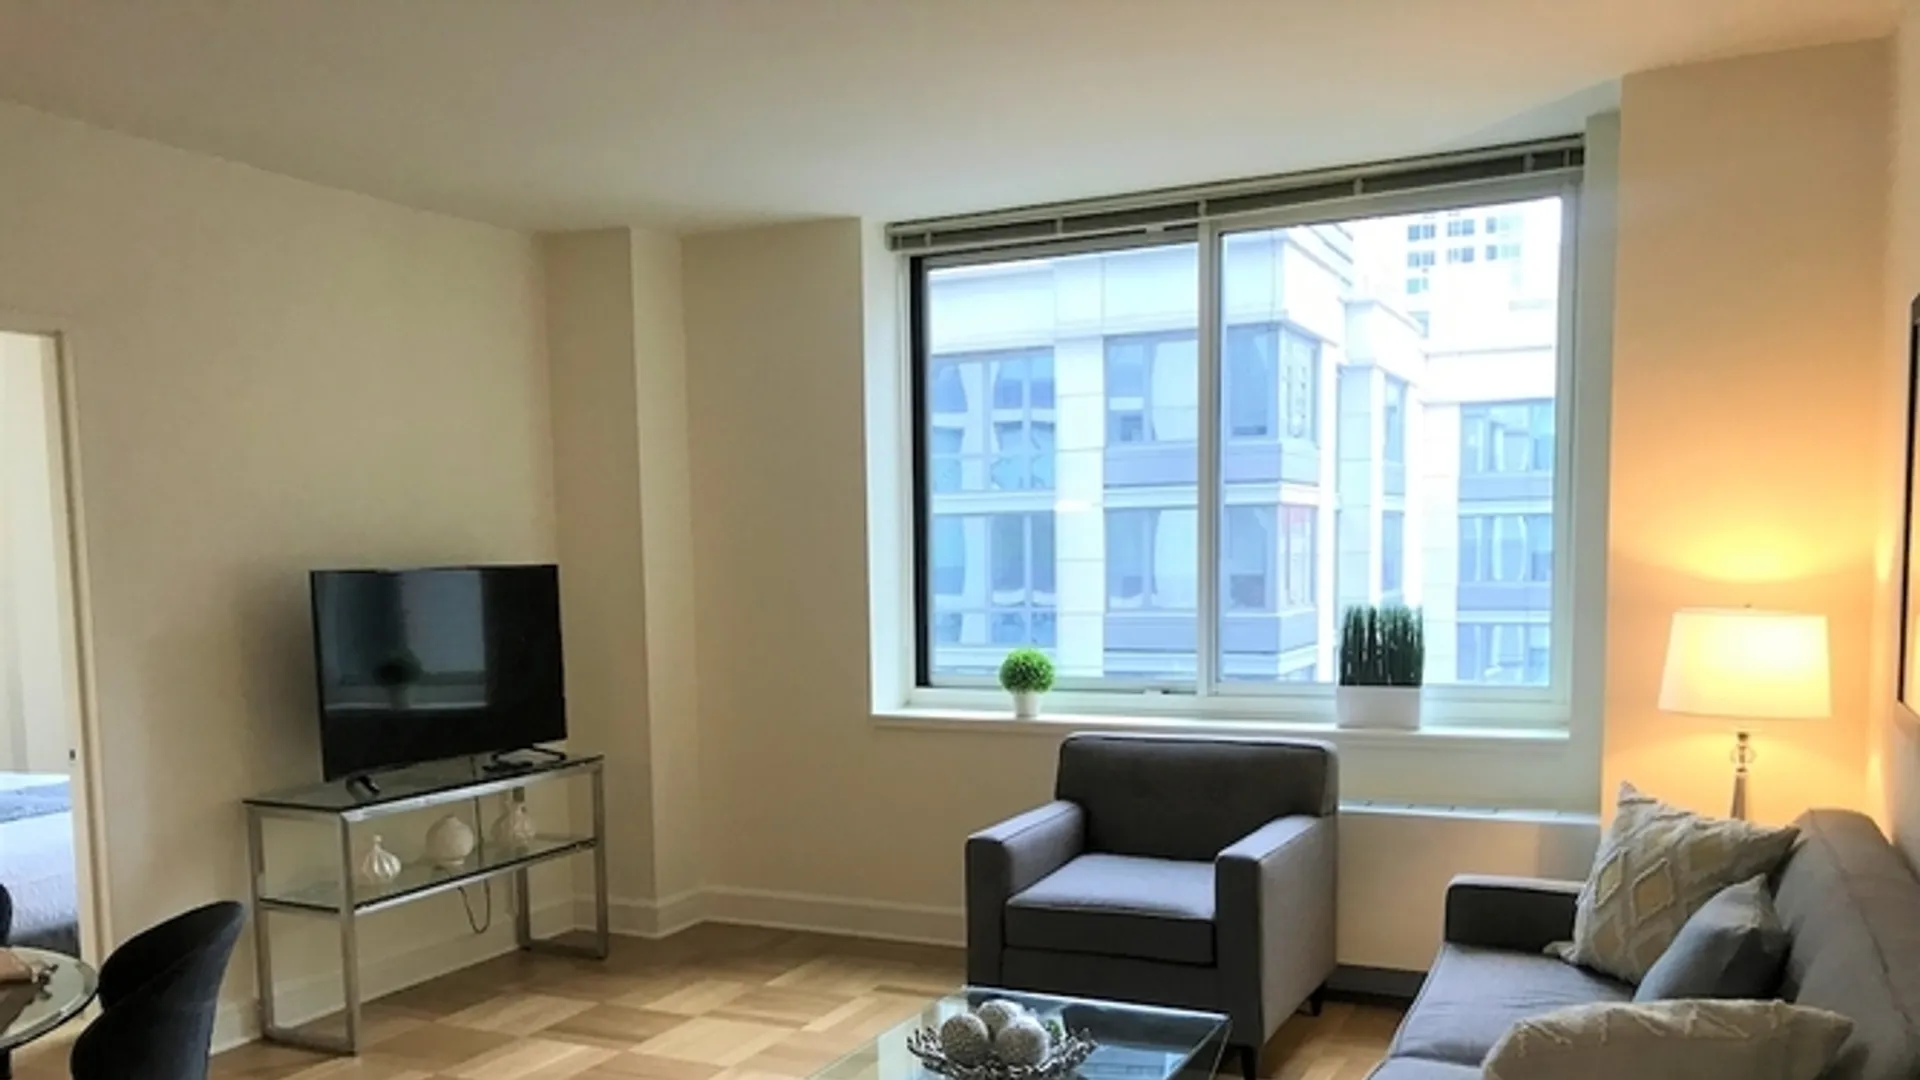 402 West 63rd St, Unit 902 | 1 bed apartment for rent